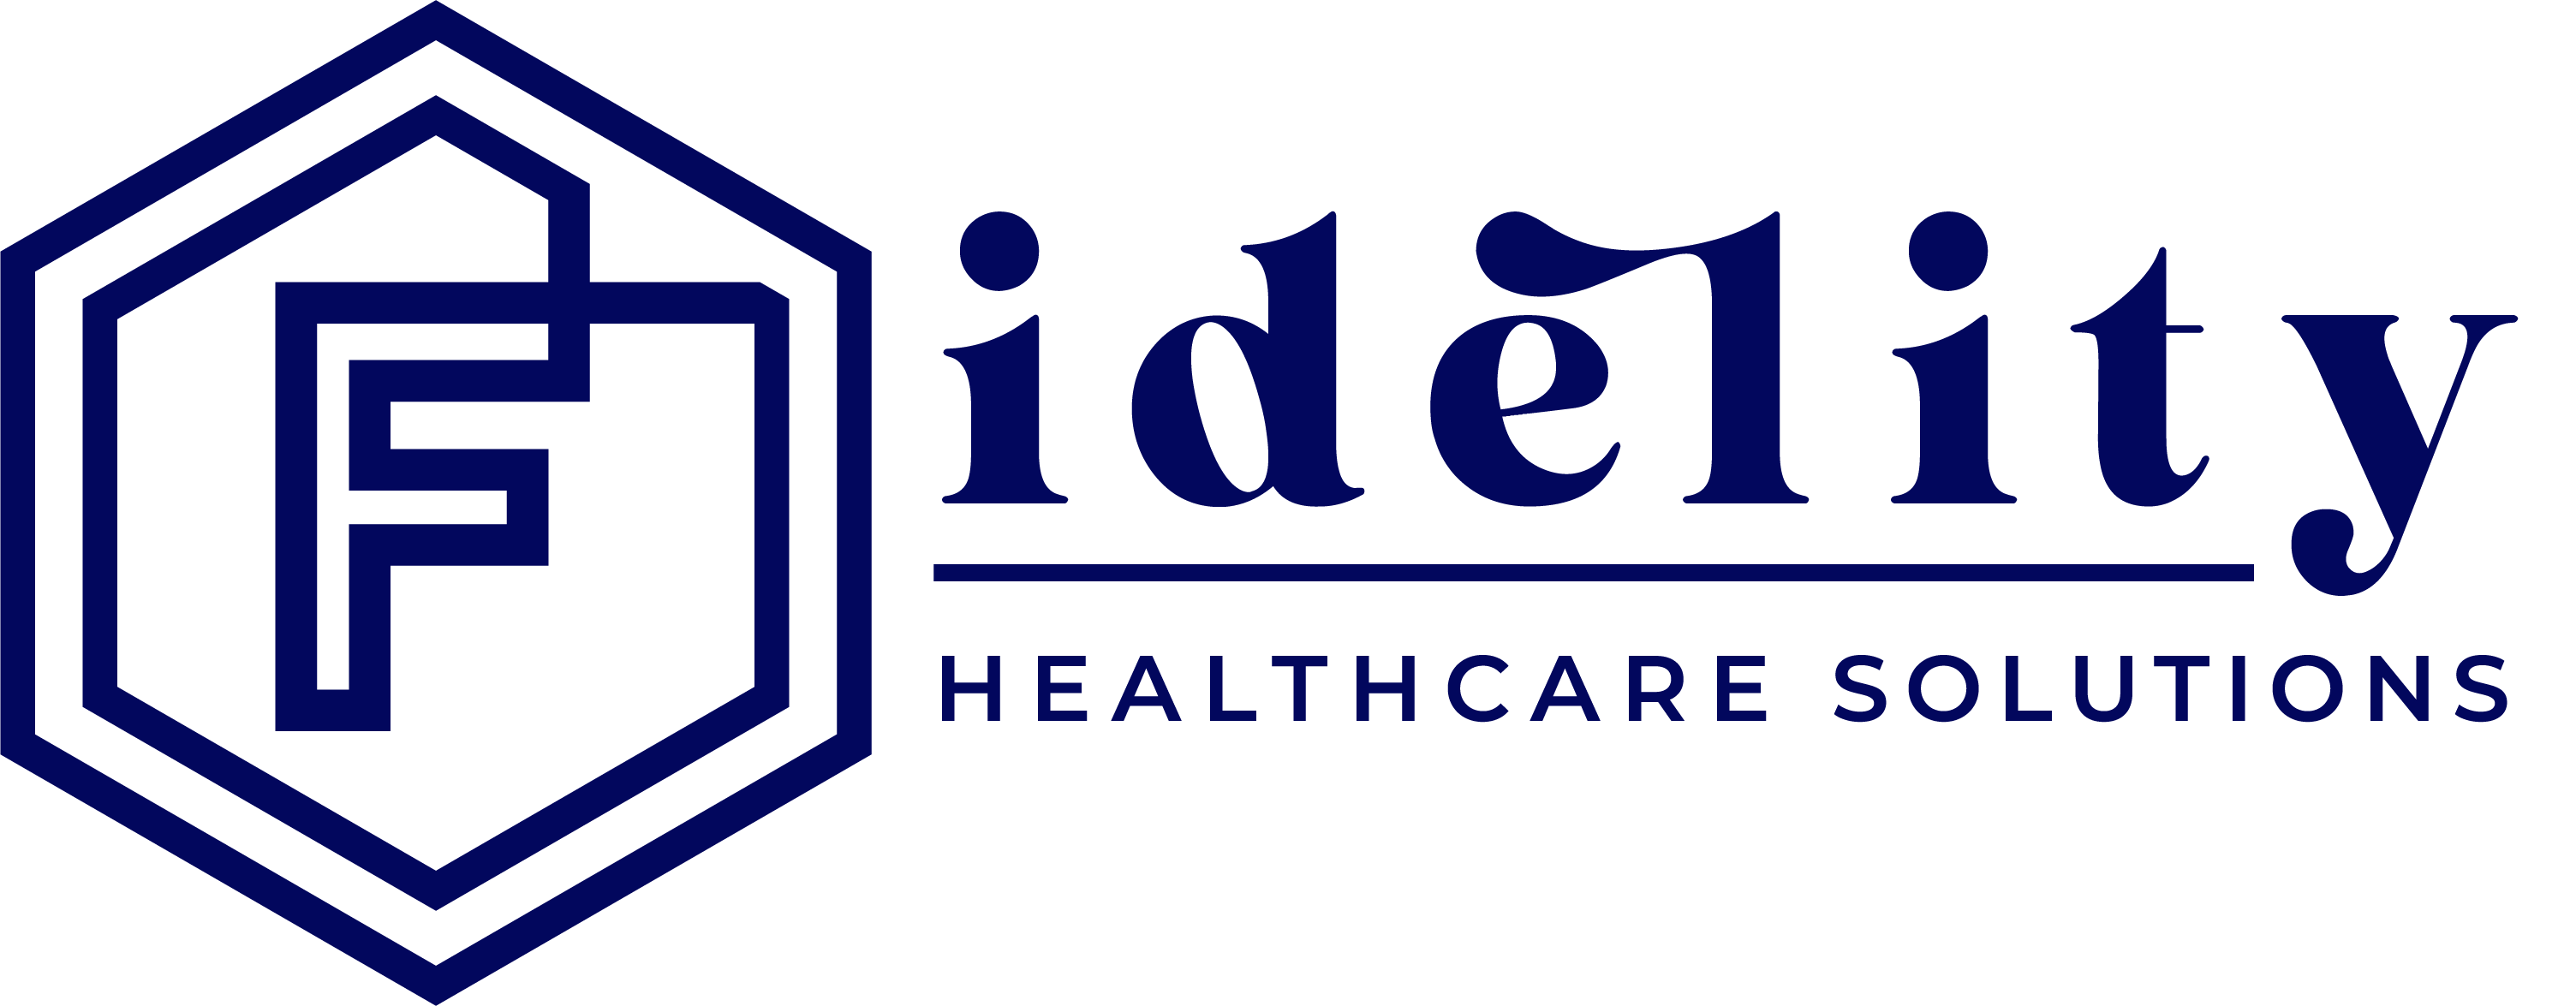 Fidelity Health Care Solutions